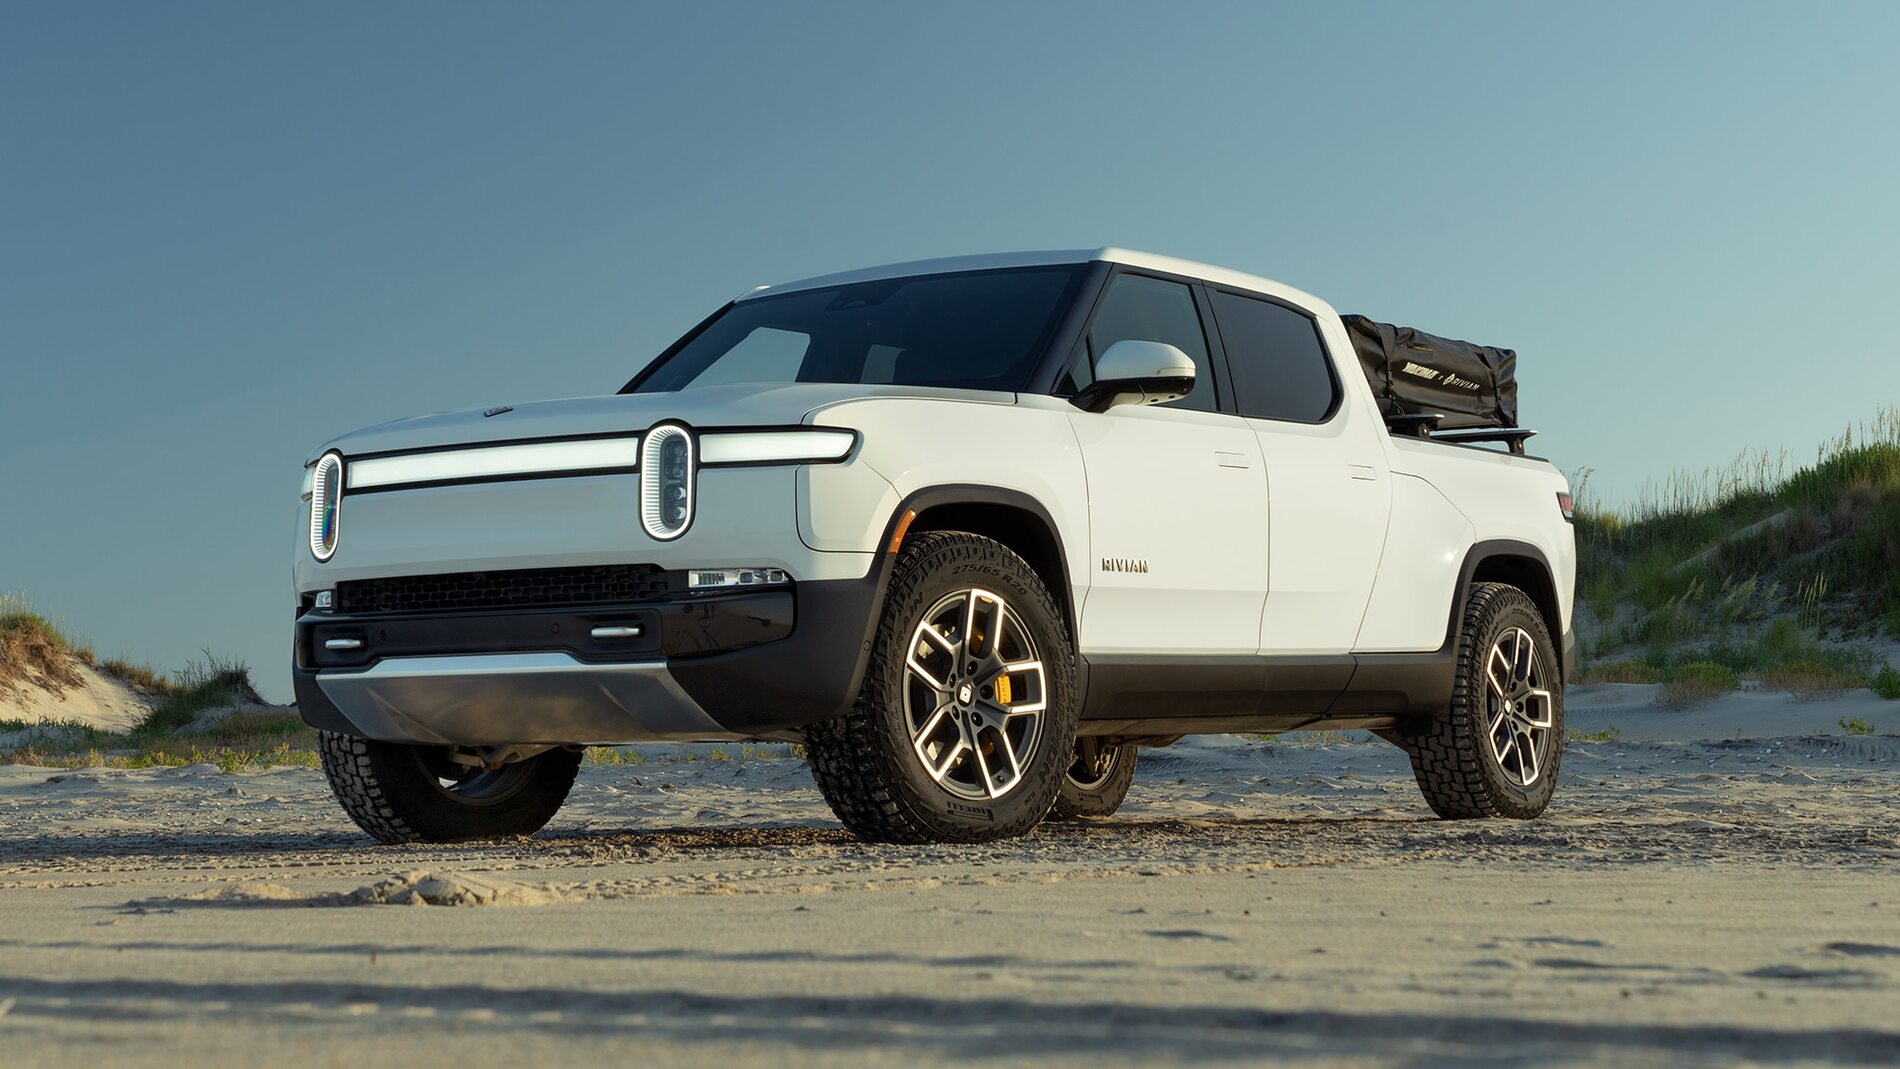 Rivian R1T R1S Motor Trend Review: The 2022 Rivian R1T Is the Most Remarkable Pickup We’ve Ever Driven 2022-Rivian-R1T-33